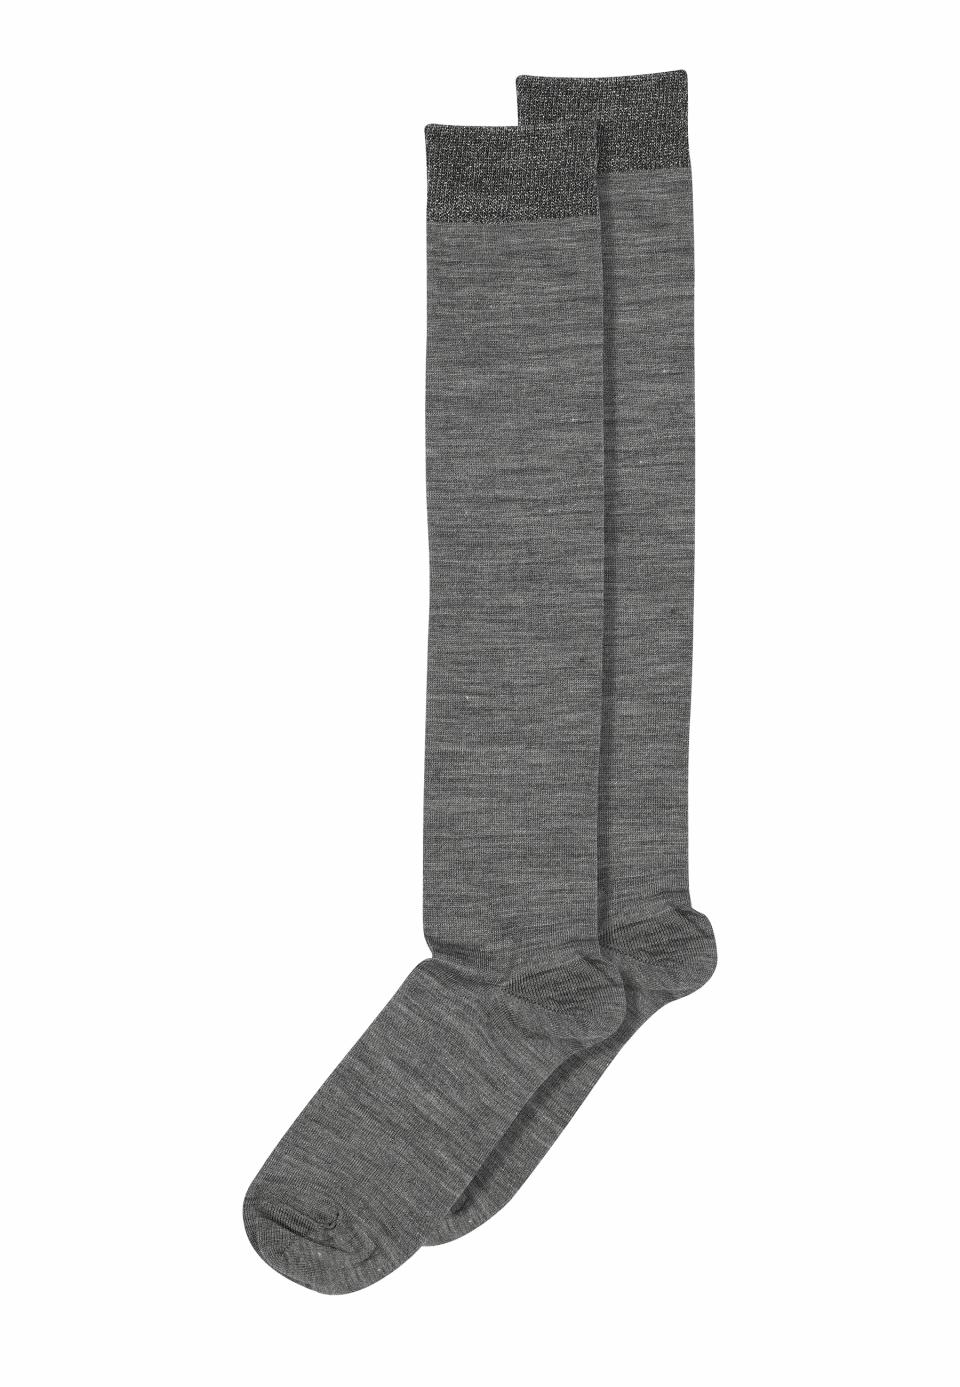 MP Wool & Silk Knee-High Socks - Warm and soft thermal knee high sock with a sparkly silver lam̩ ribbed cuff.